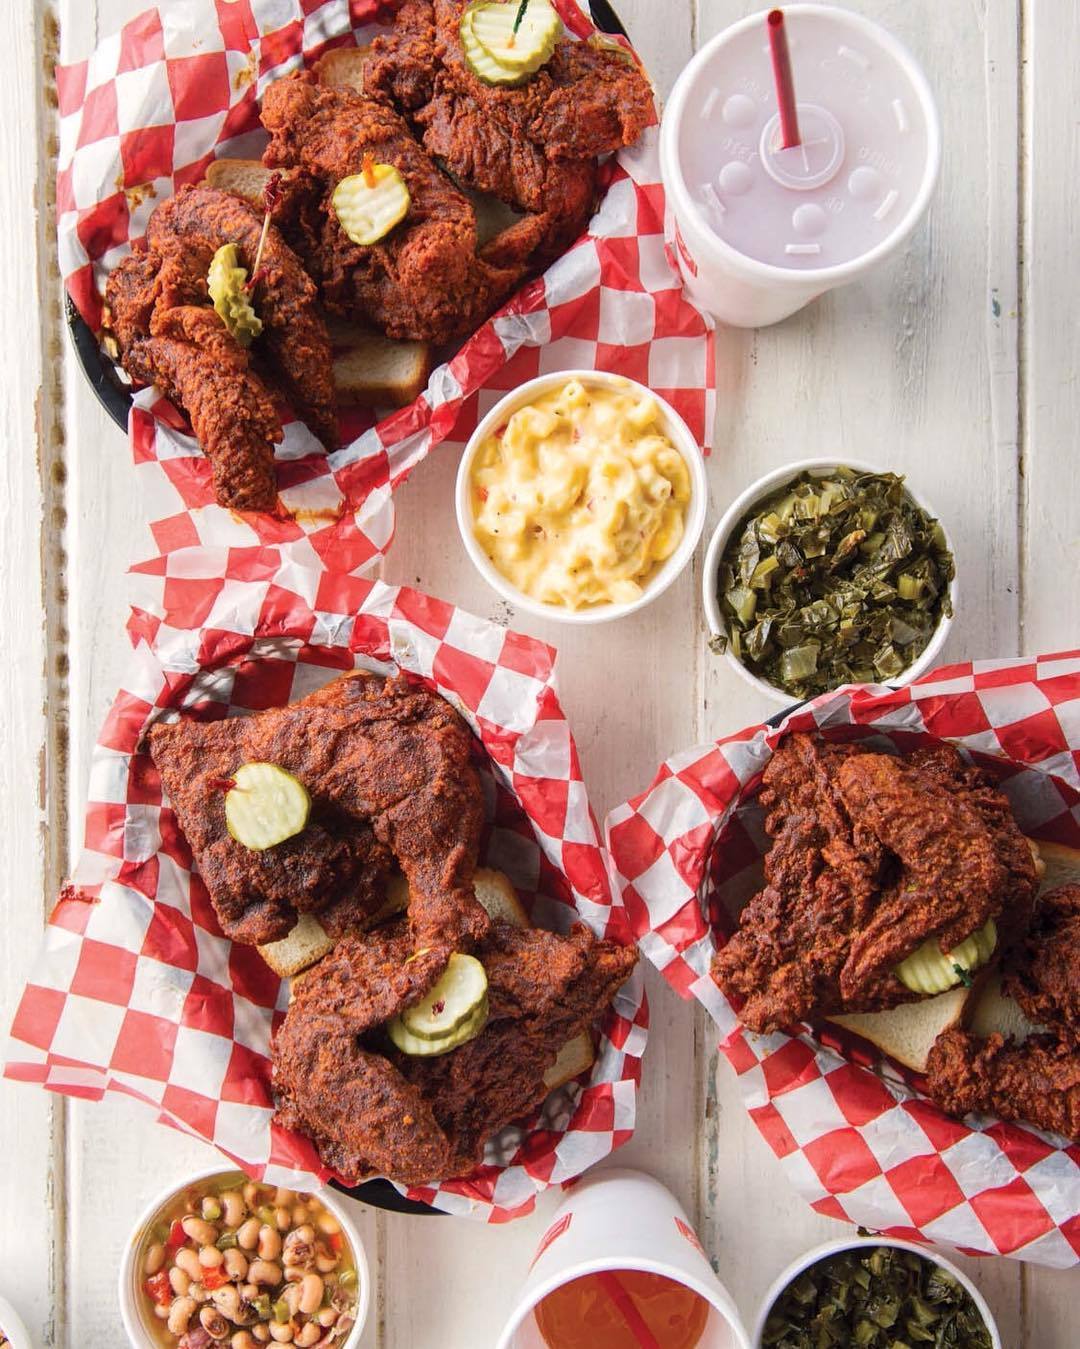 Eat hot chicken with me so I know it&rsquo;s real ❤️🍗 . . .  Missing @hattiebs